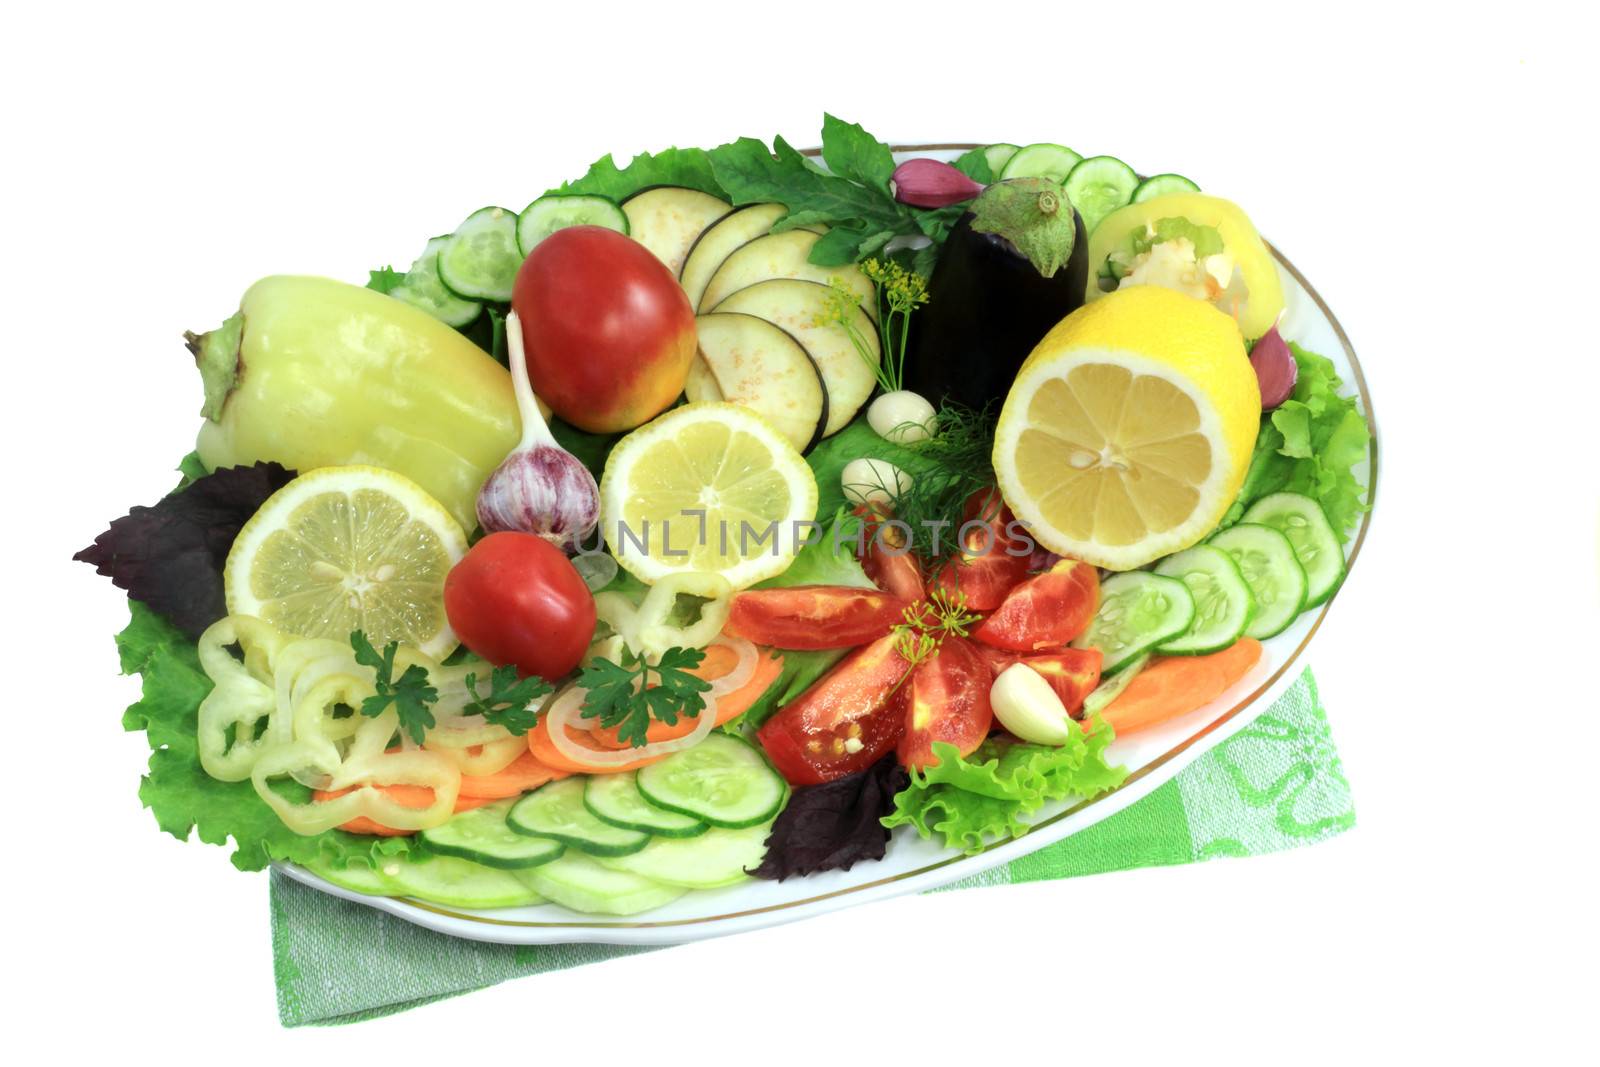 Vegetables and fruit platter. Presented on a white background. by georgina198